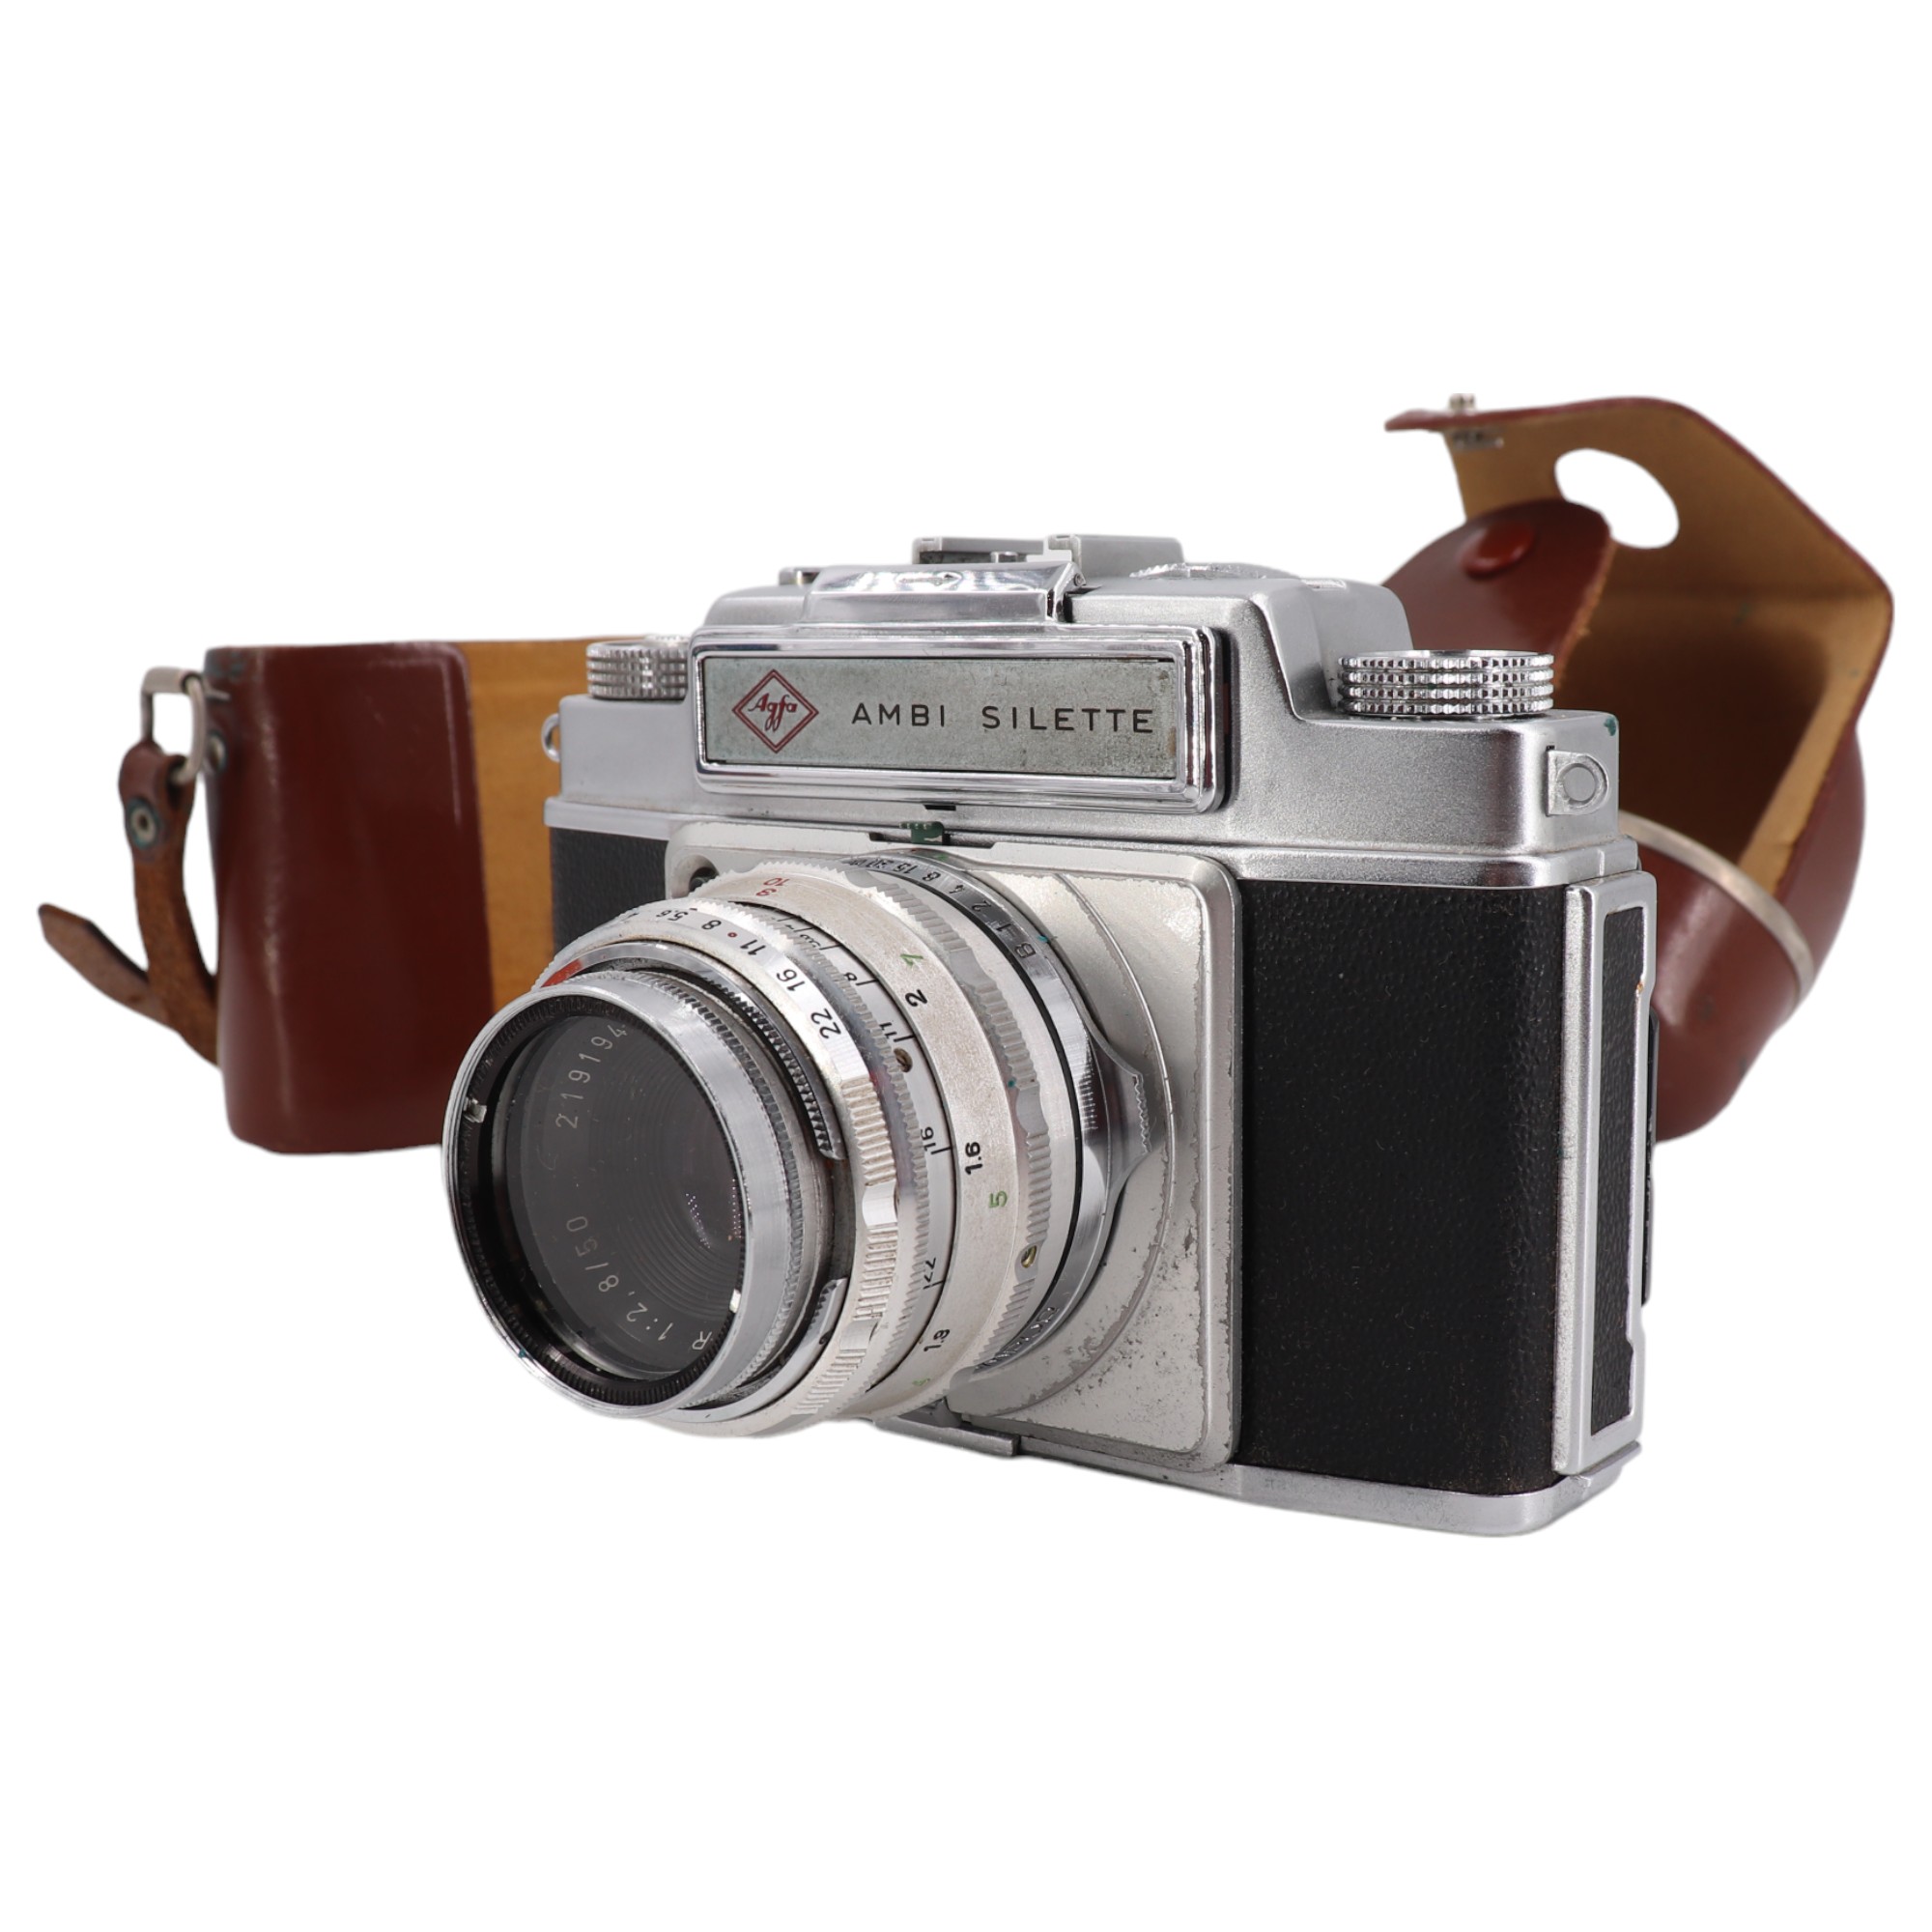 An Agfa Ambi Silette 35mm Film Rangefinder Camera, in leather case,1957-1961, mounted with an Agfa - Image 5 of 8